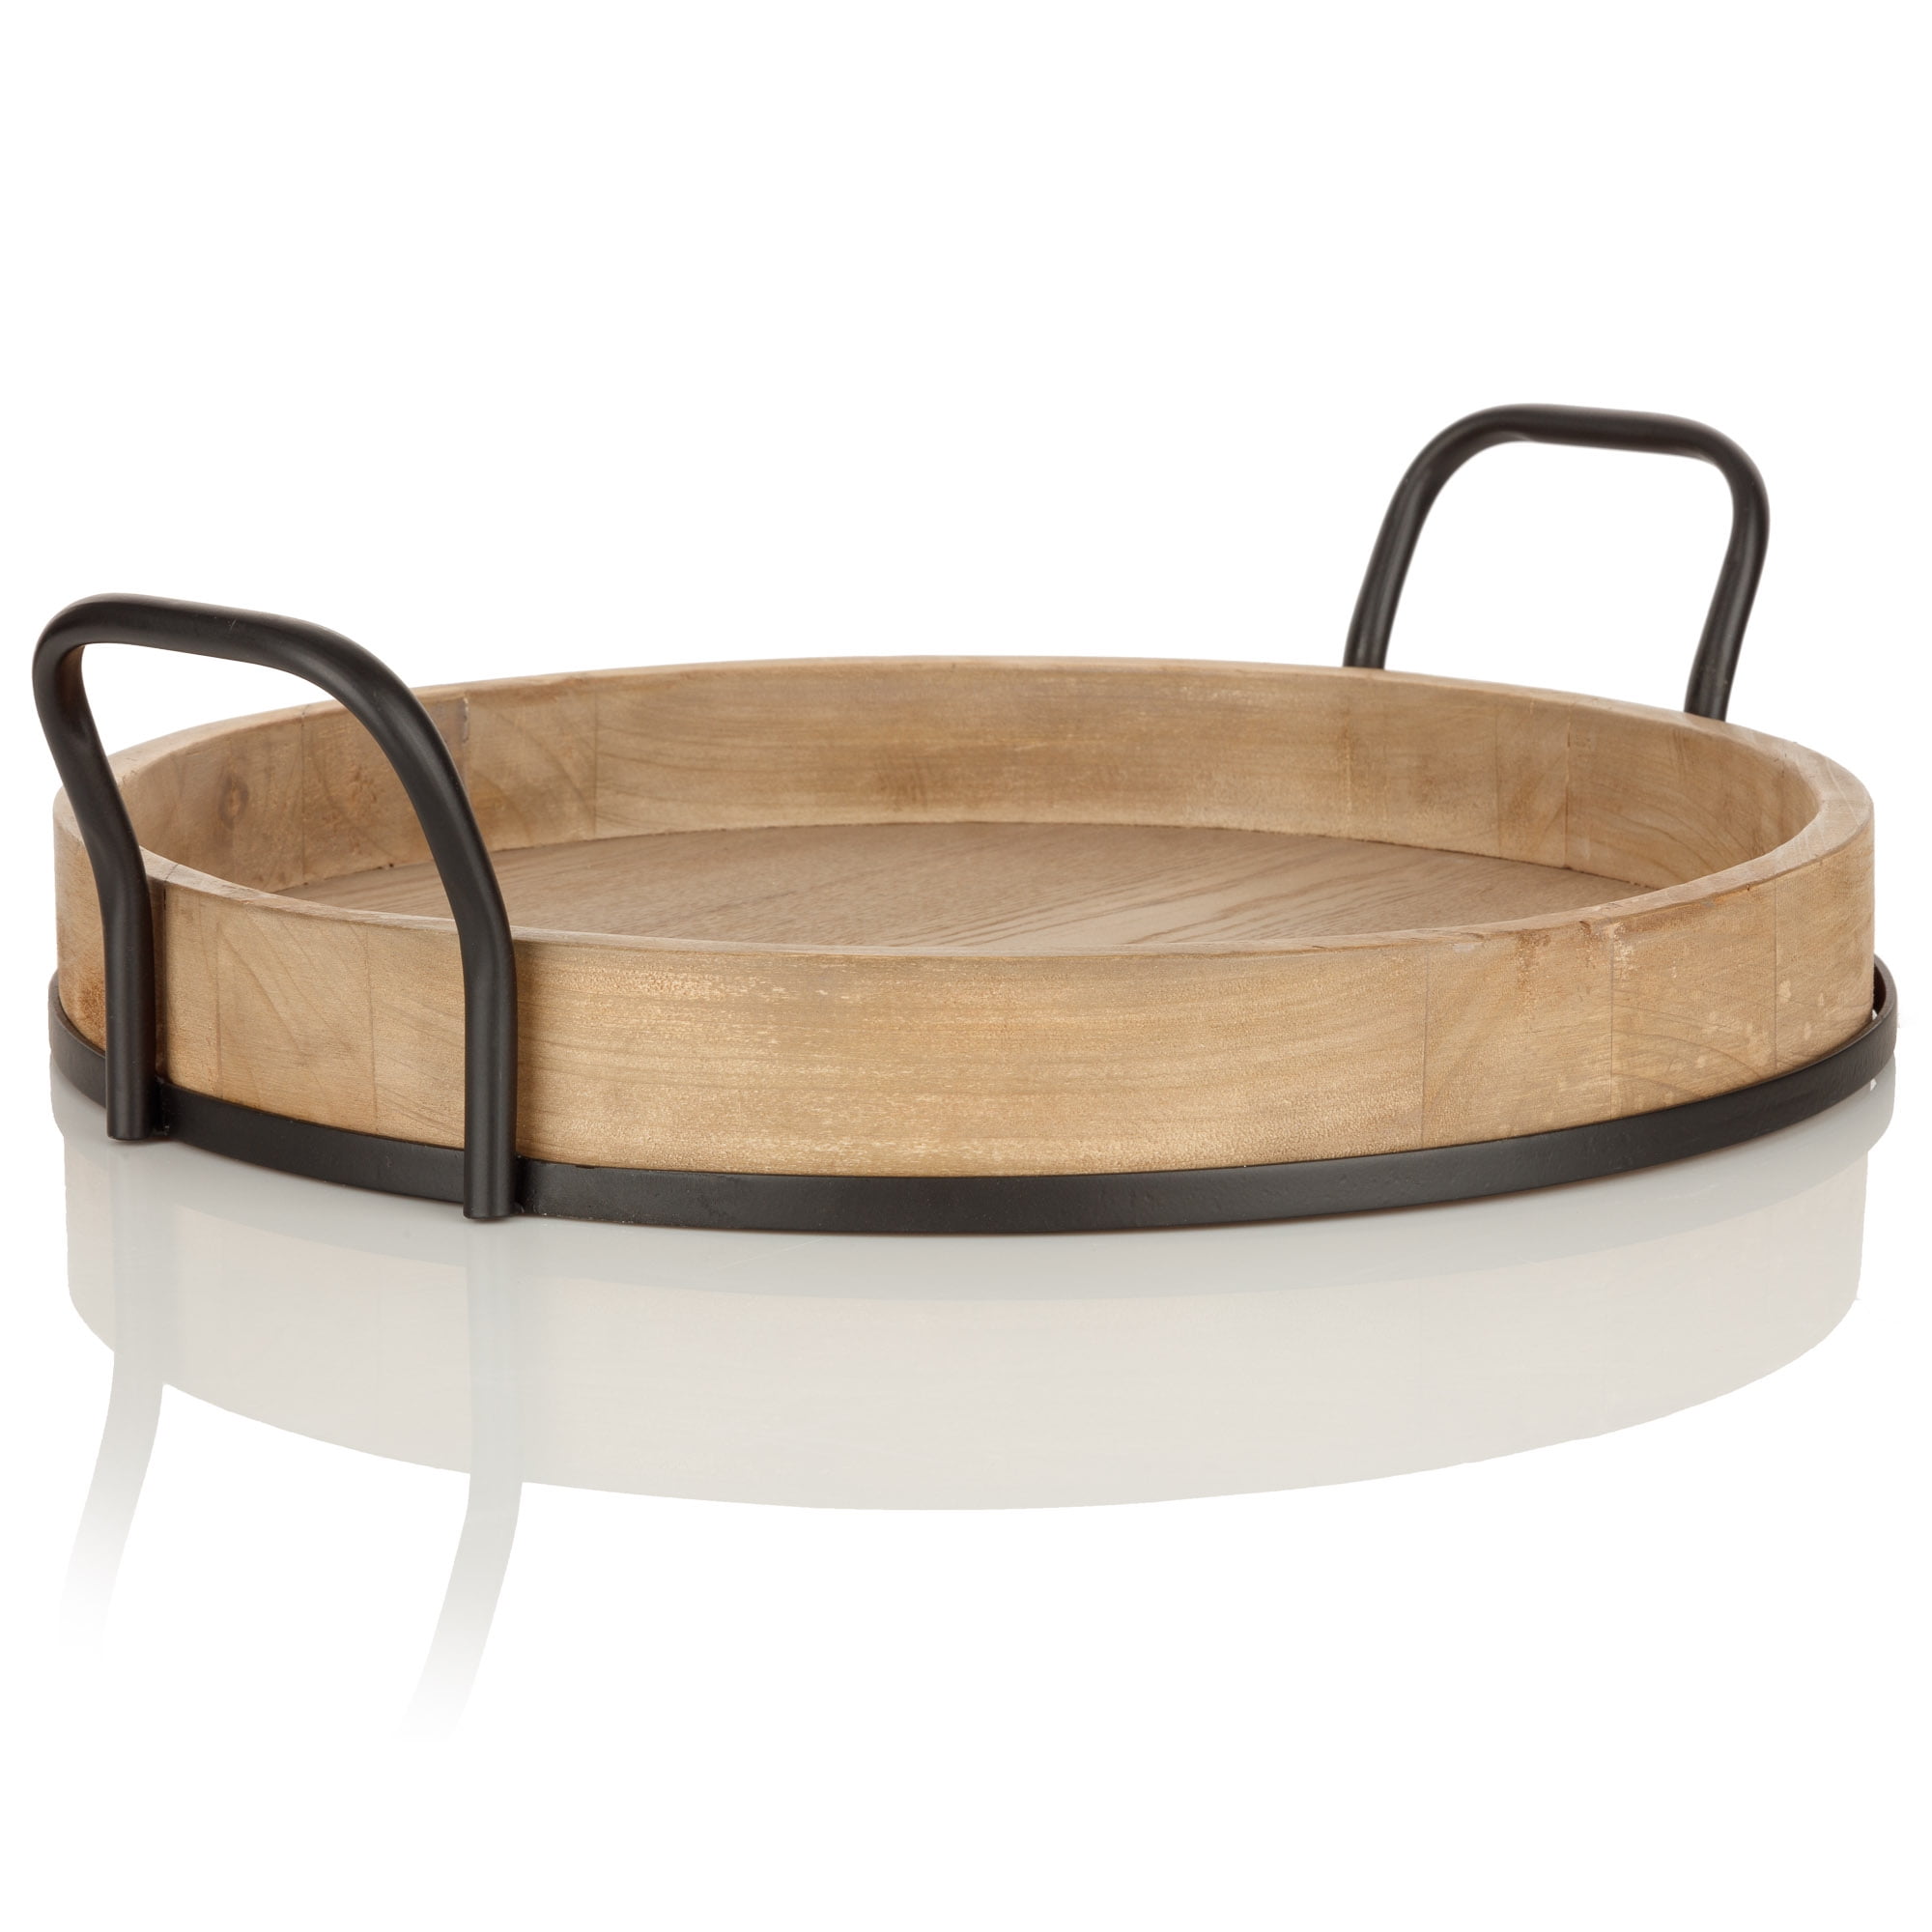 Round Wood Plank Serving Tray